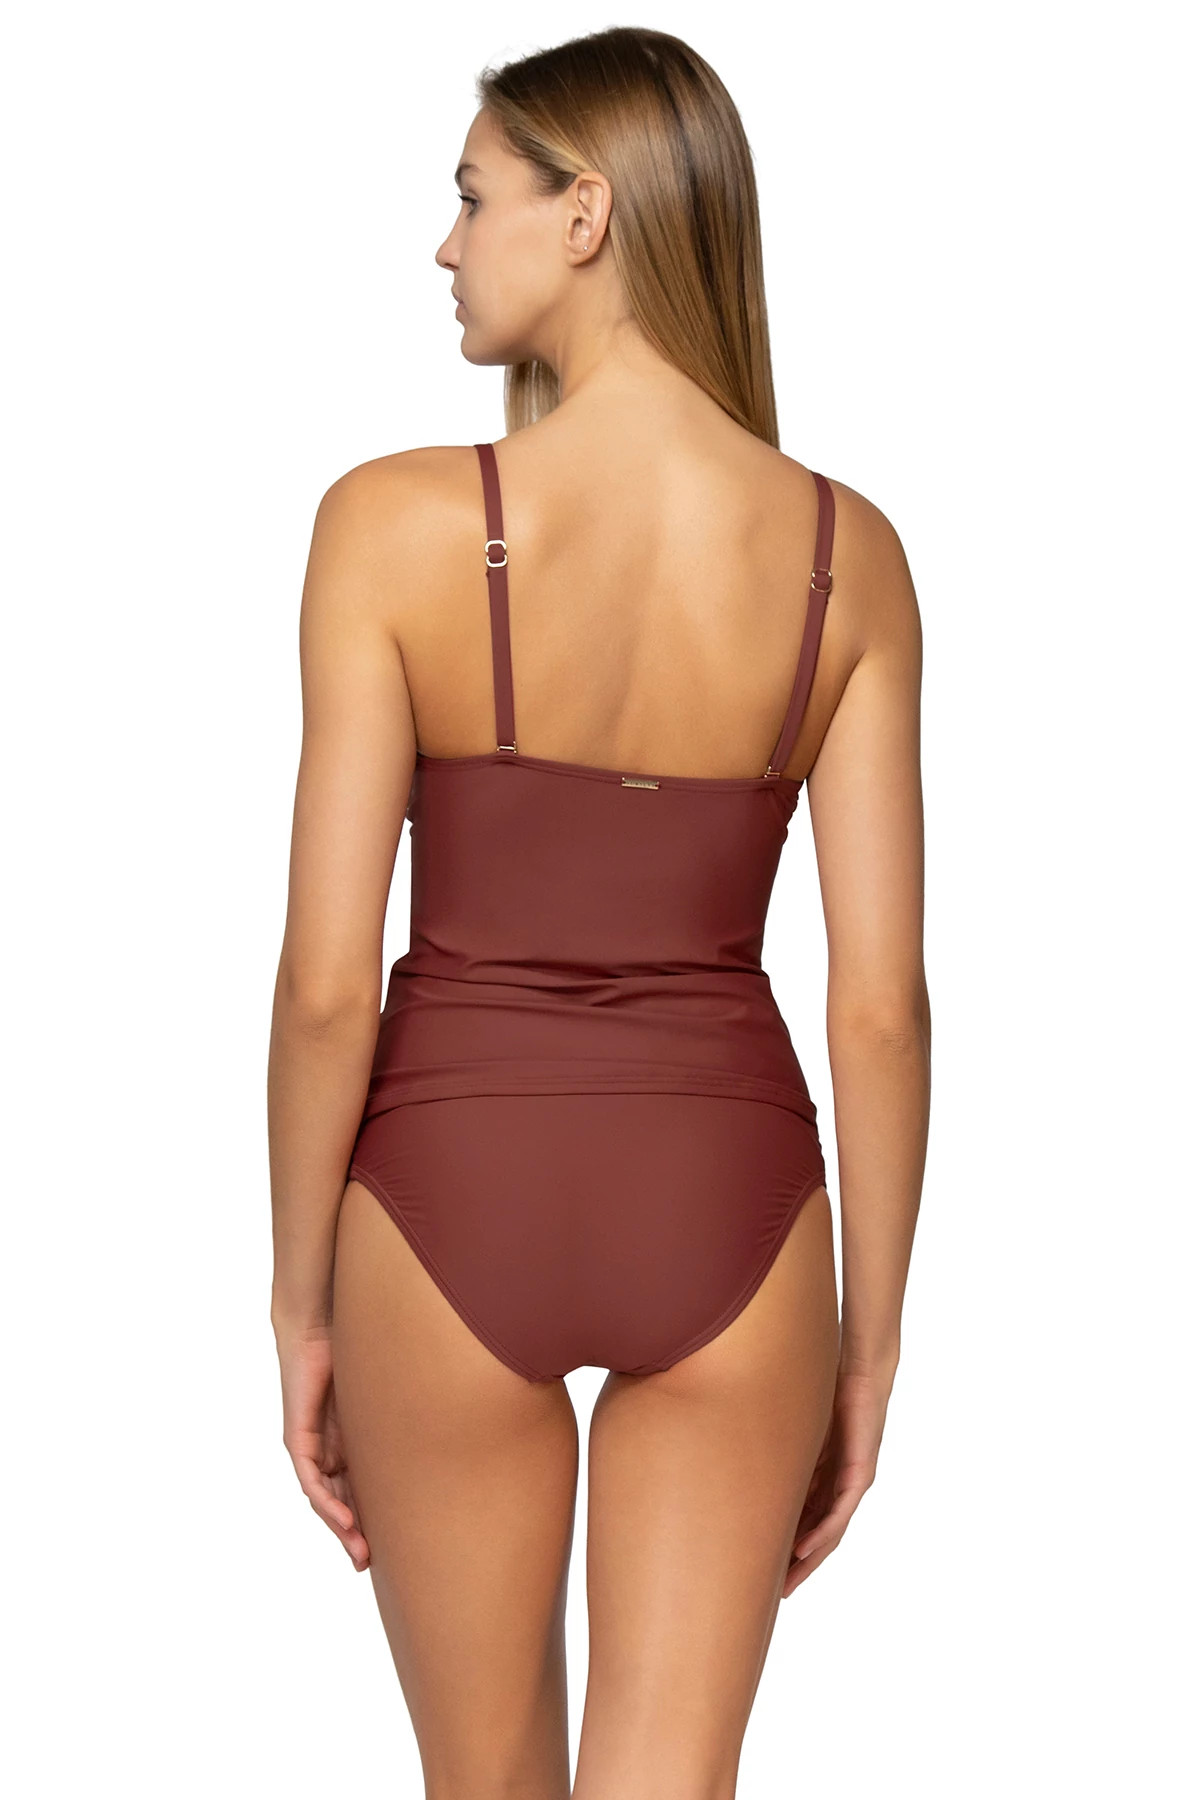 TUSCAN RED Simone Over The Shoulder Tankini Top image number 3